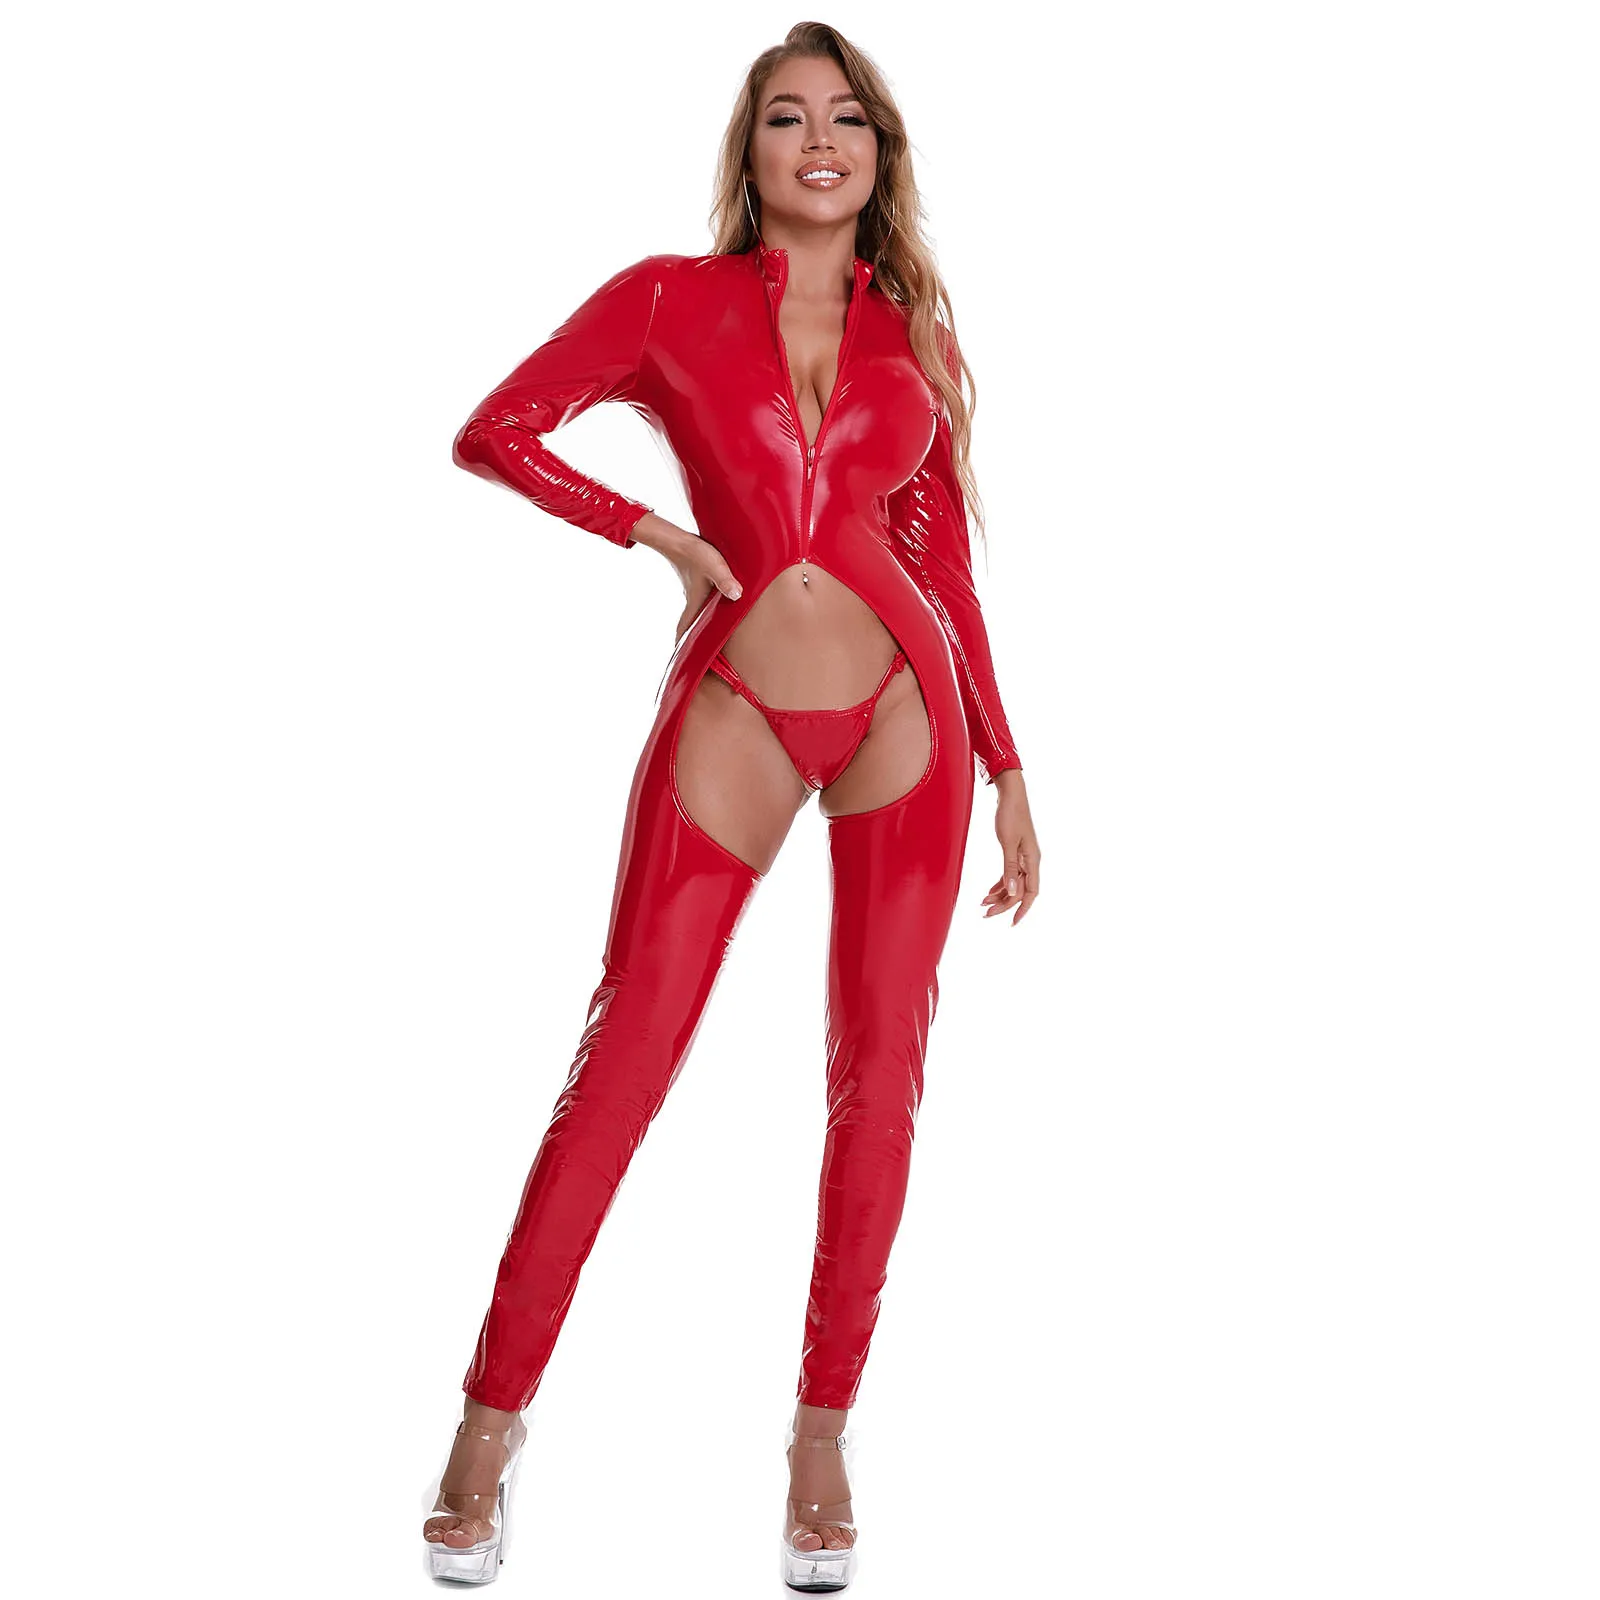 Crotchless latex catsuit